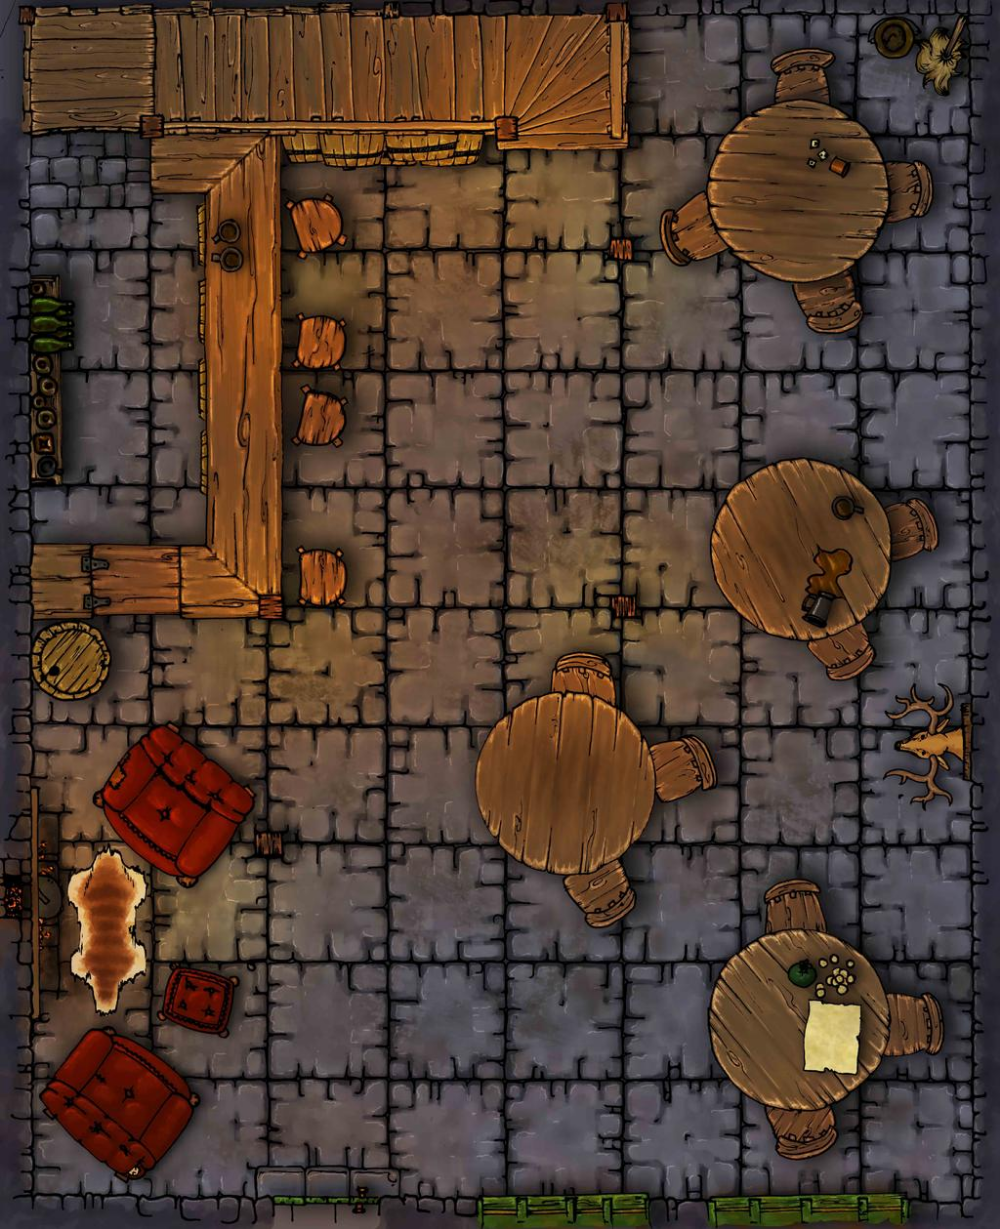 Dungeons And Dragons Tiled Tavern Map By Mike Perrotta On DeviantArt 